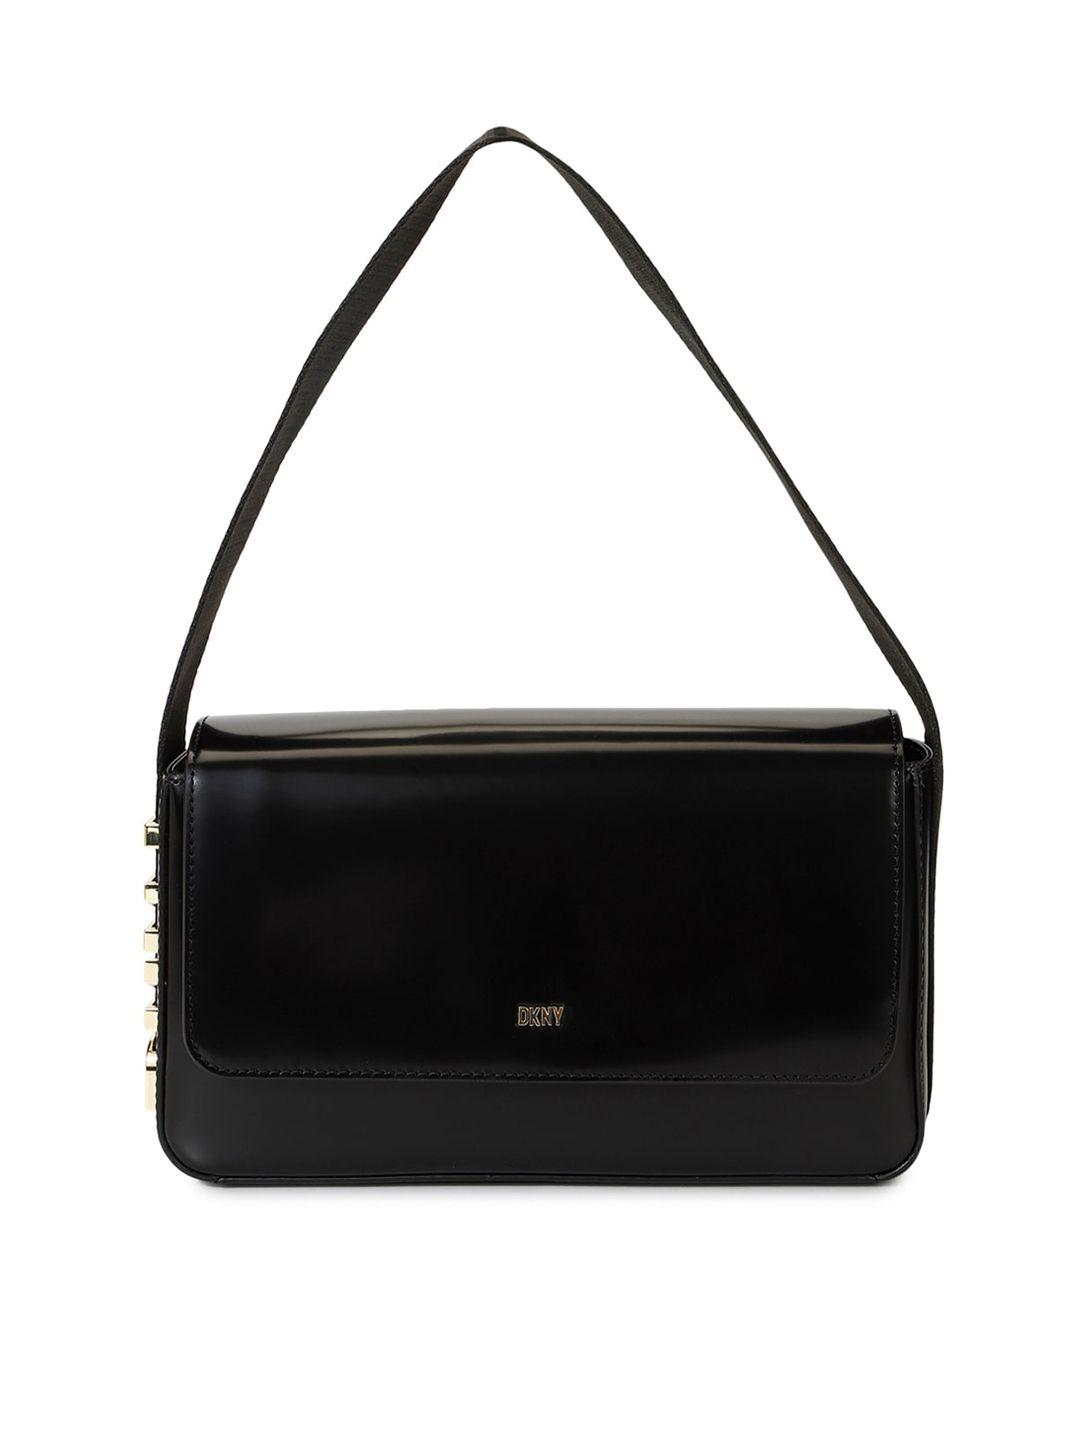 dkny leather structured handheld bag